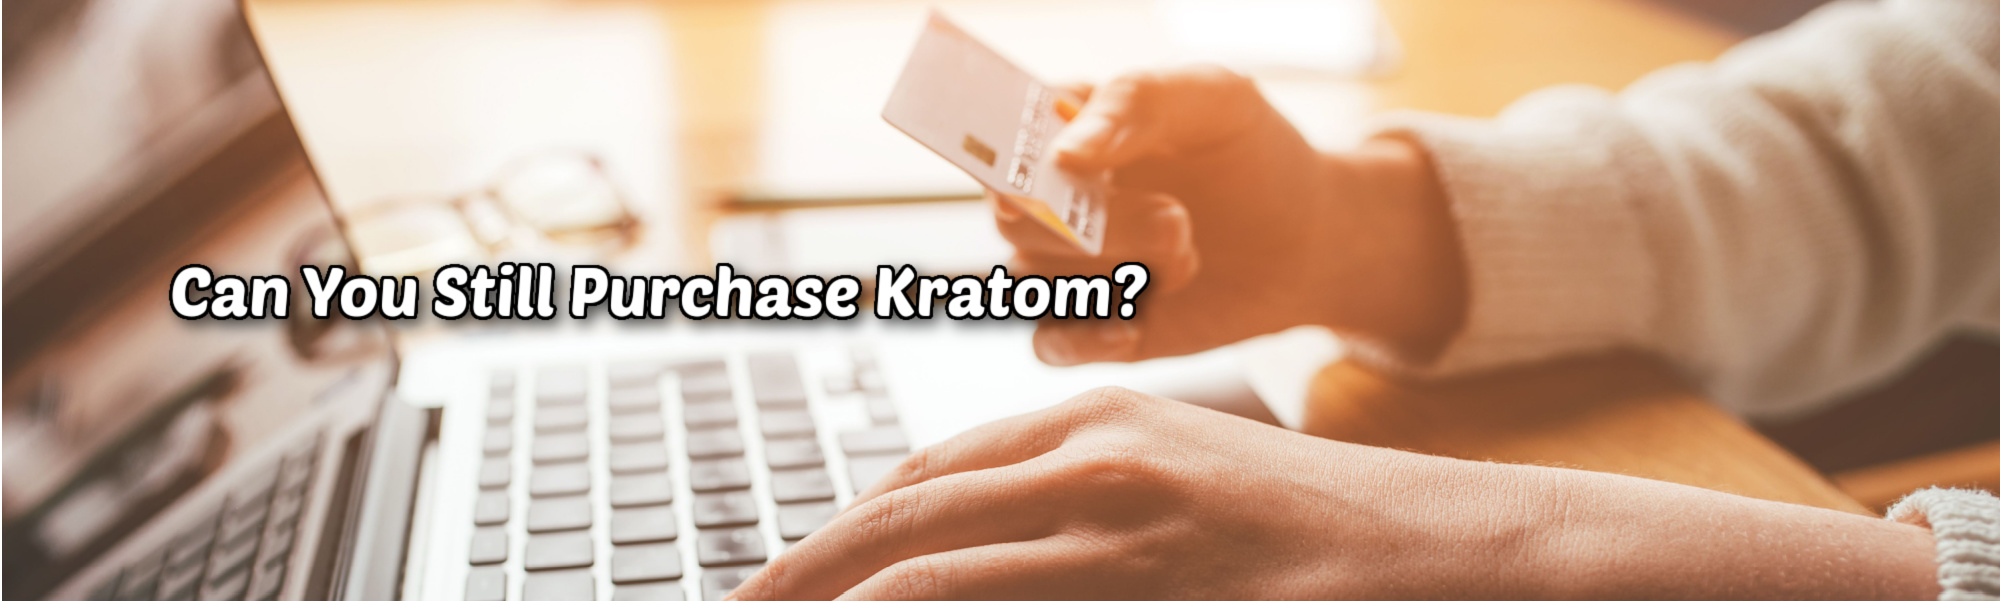 image of can you still purchase kratom